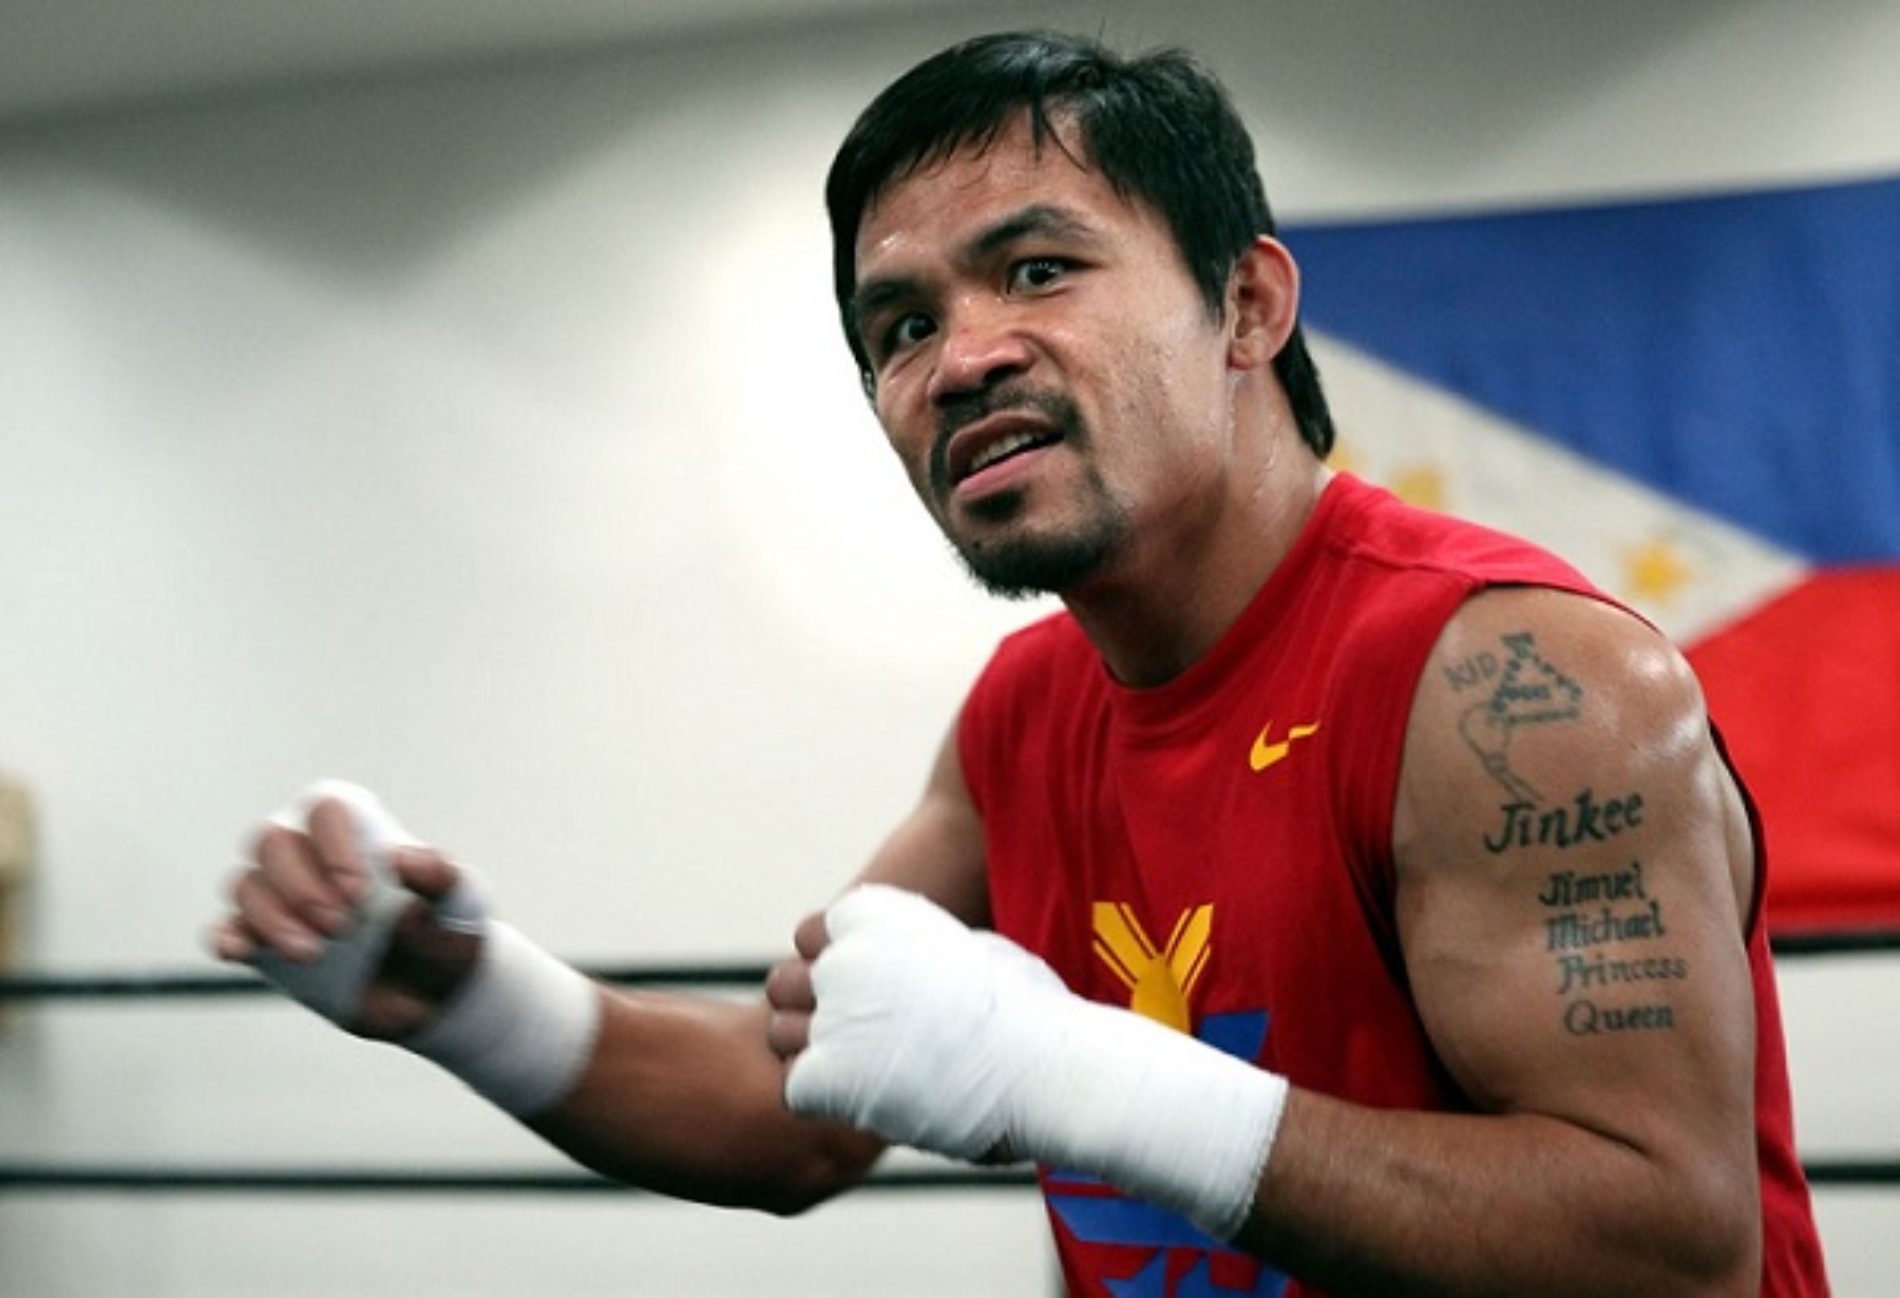 Boxer Manny Pacquiao is not finished with jabbing the LGBT